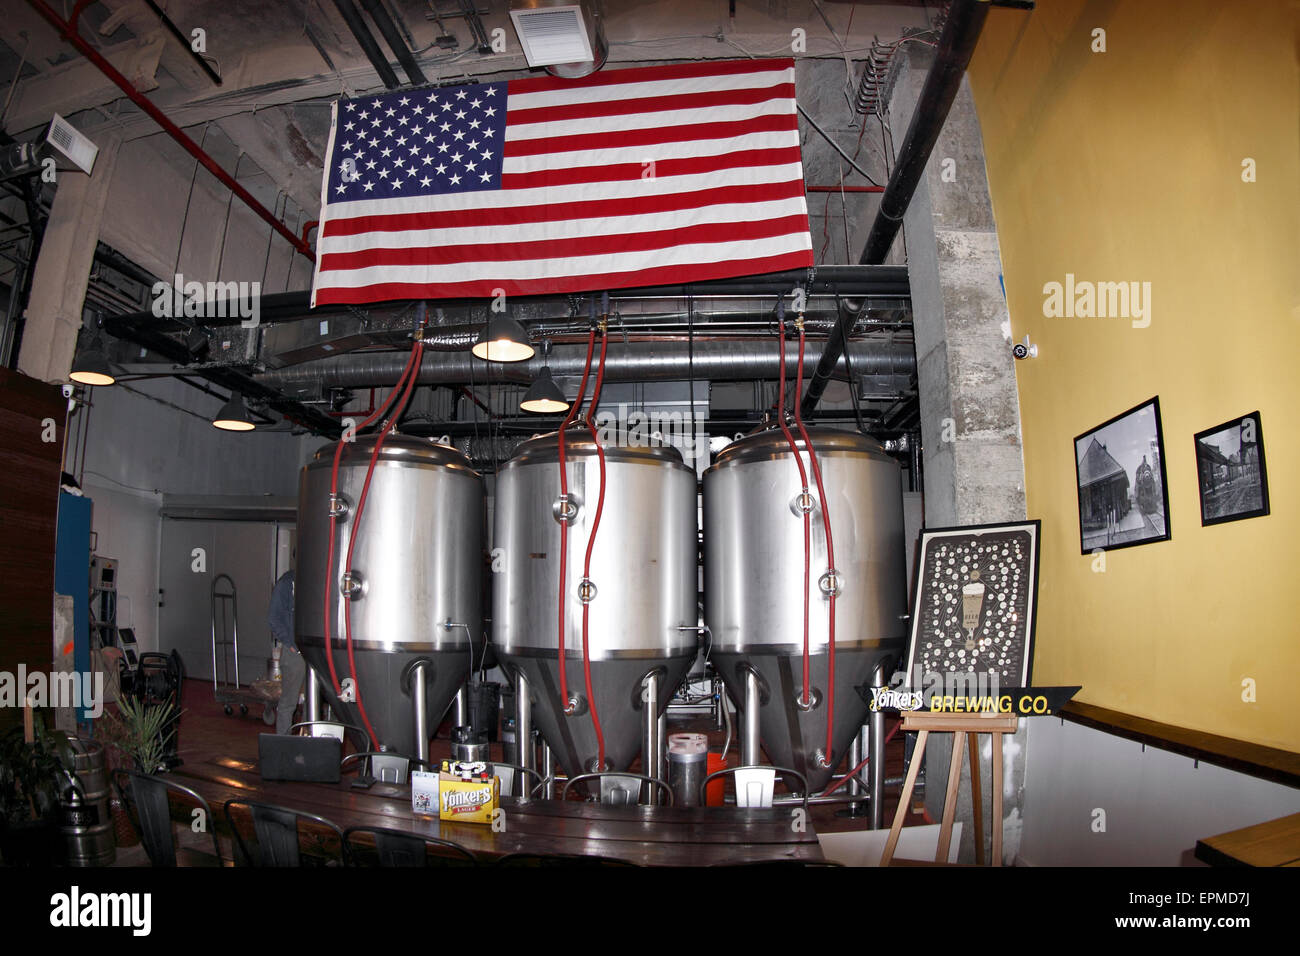 Inside the Yonkers Brewery Micro Brewery Yonkers New York Stock Photo